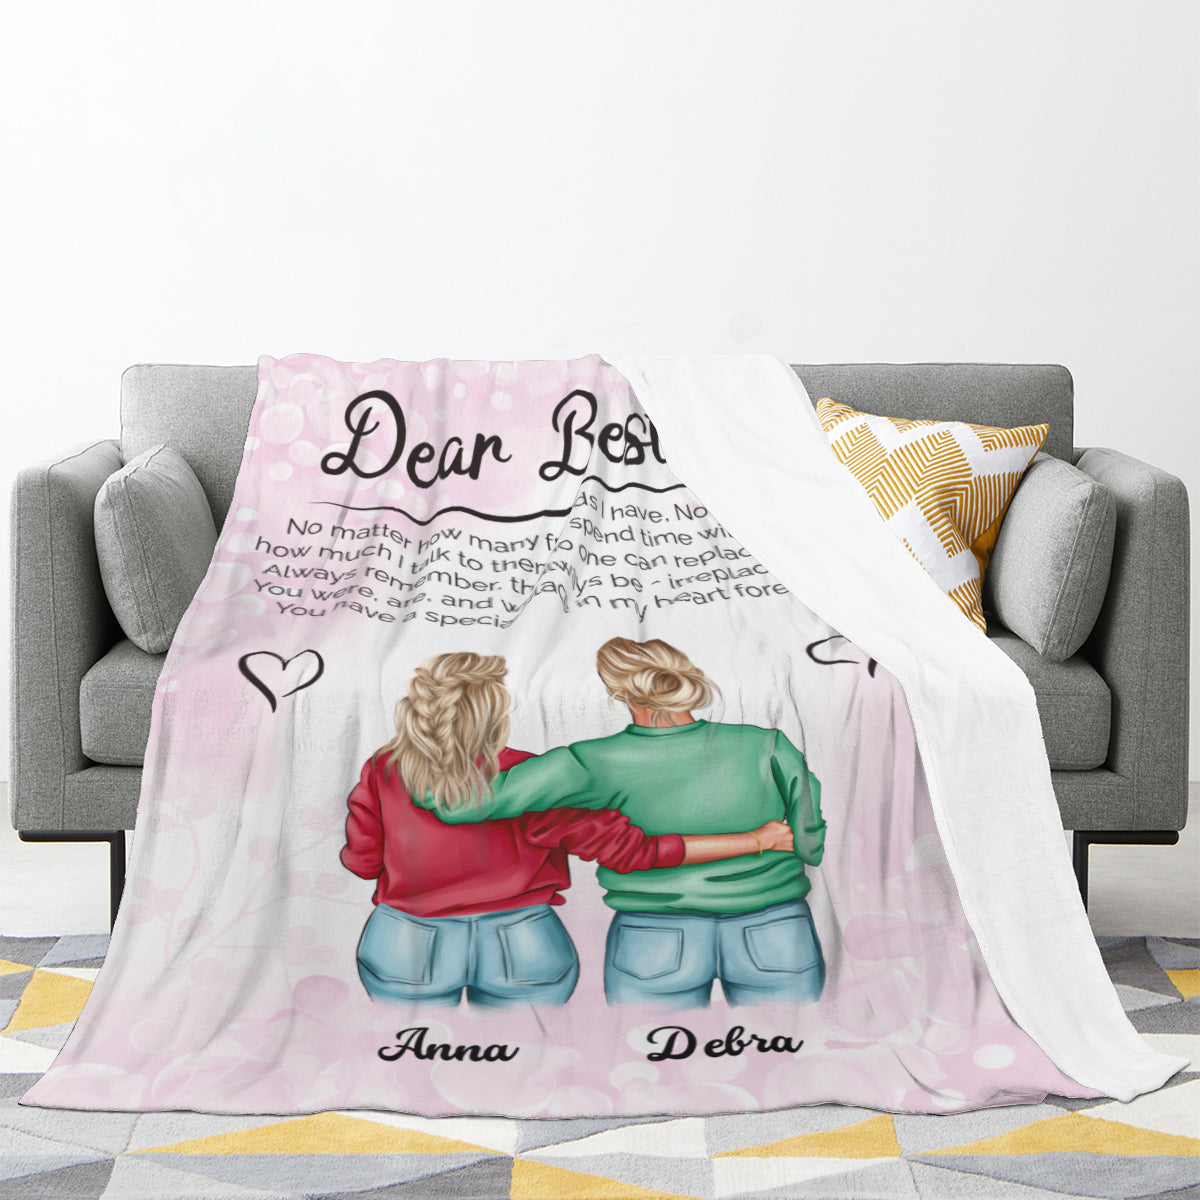 You Have a Special Place in My Heart Forever-Photo Blanket for Bestie